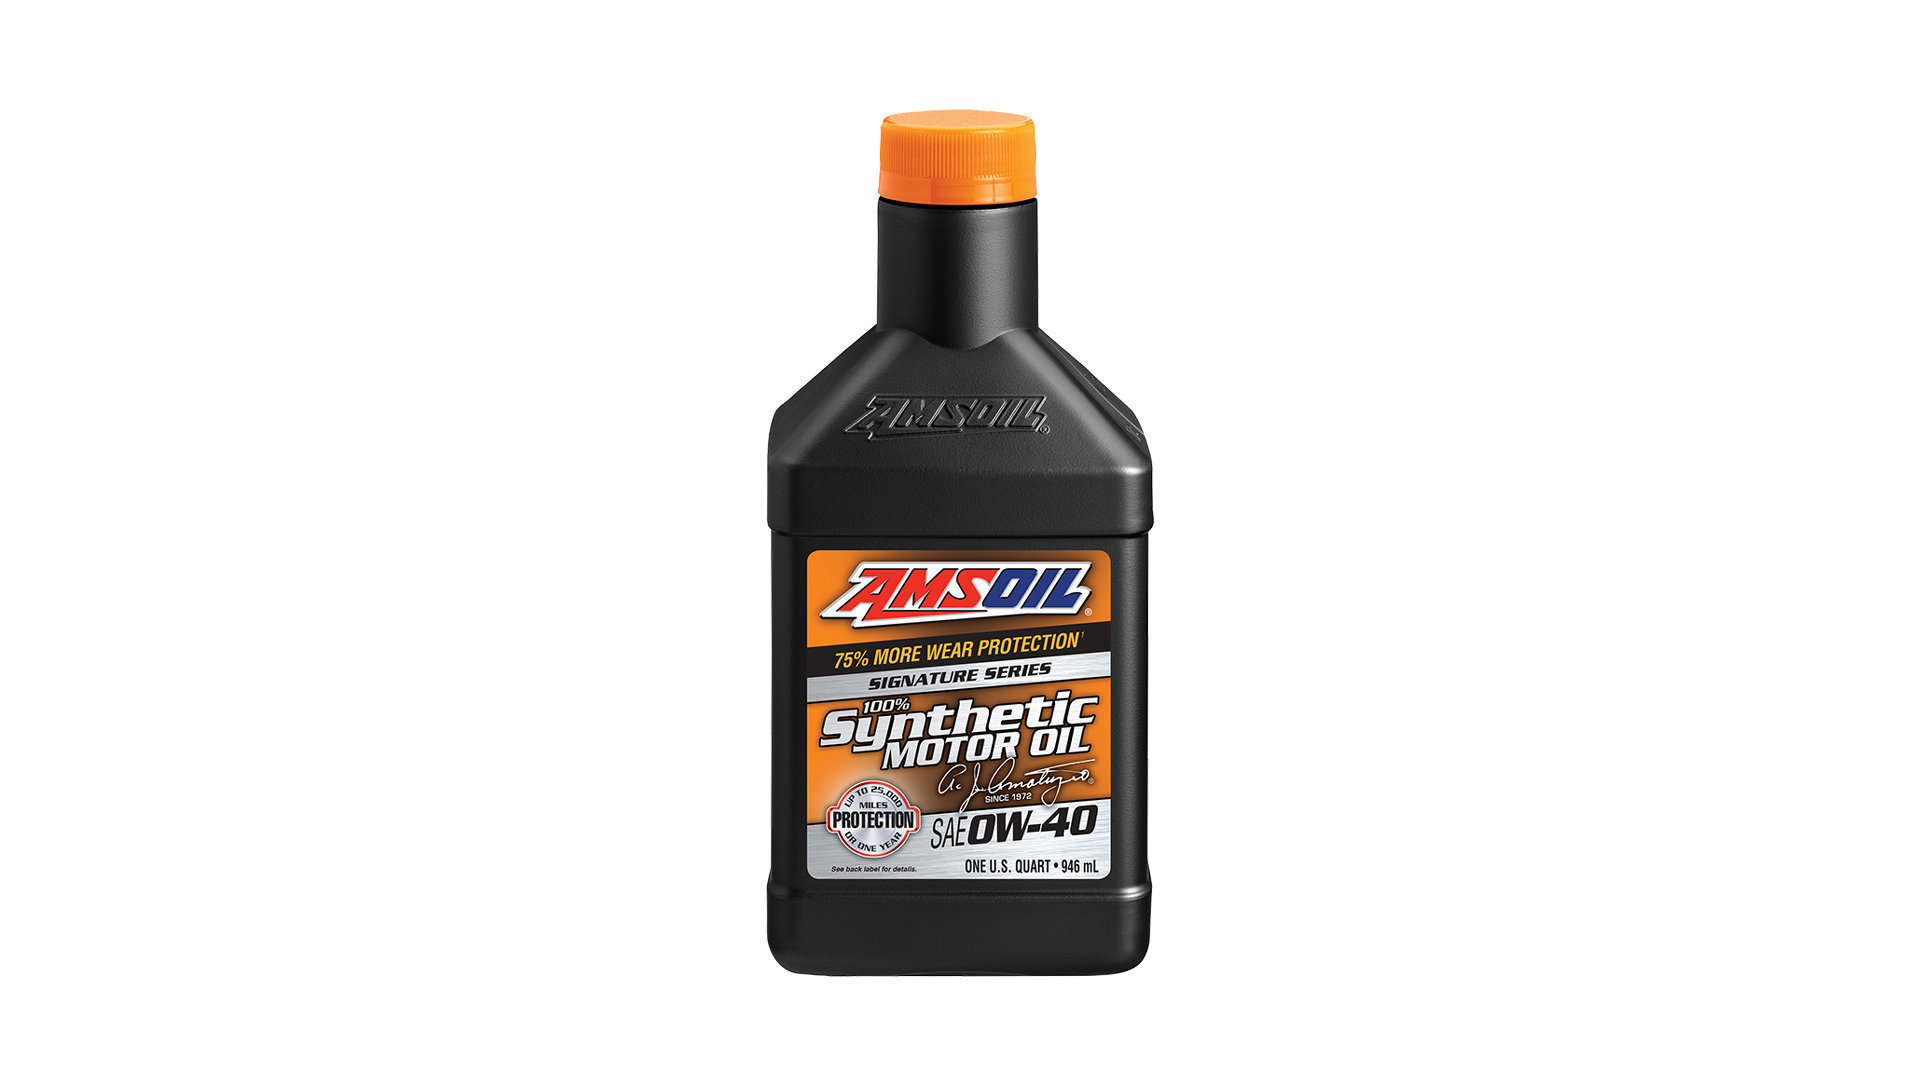 Signature series synthetic. Aмsoil SS 0-20. AMSOIL 5w20 артикул. AMSOIL 5w30. Моторное масло AMSOIL Signature Series Synthetic Motor Oil 0w-40 0.946 л.